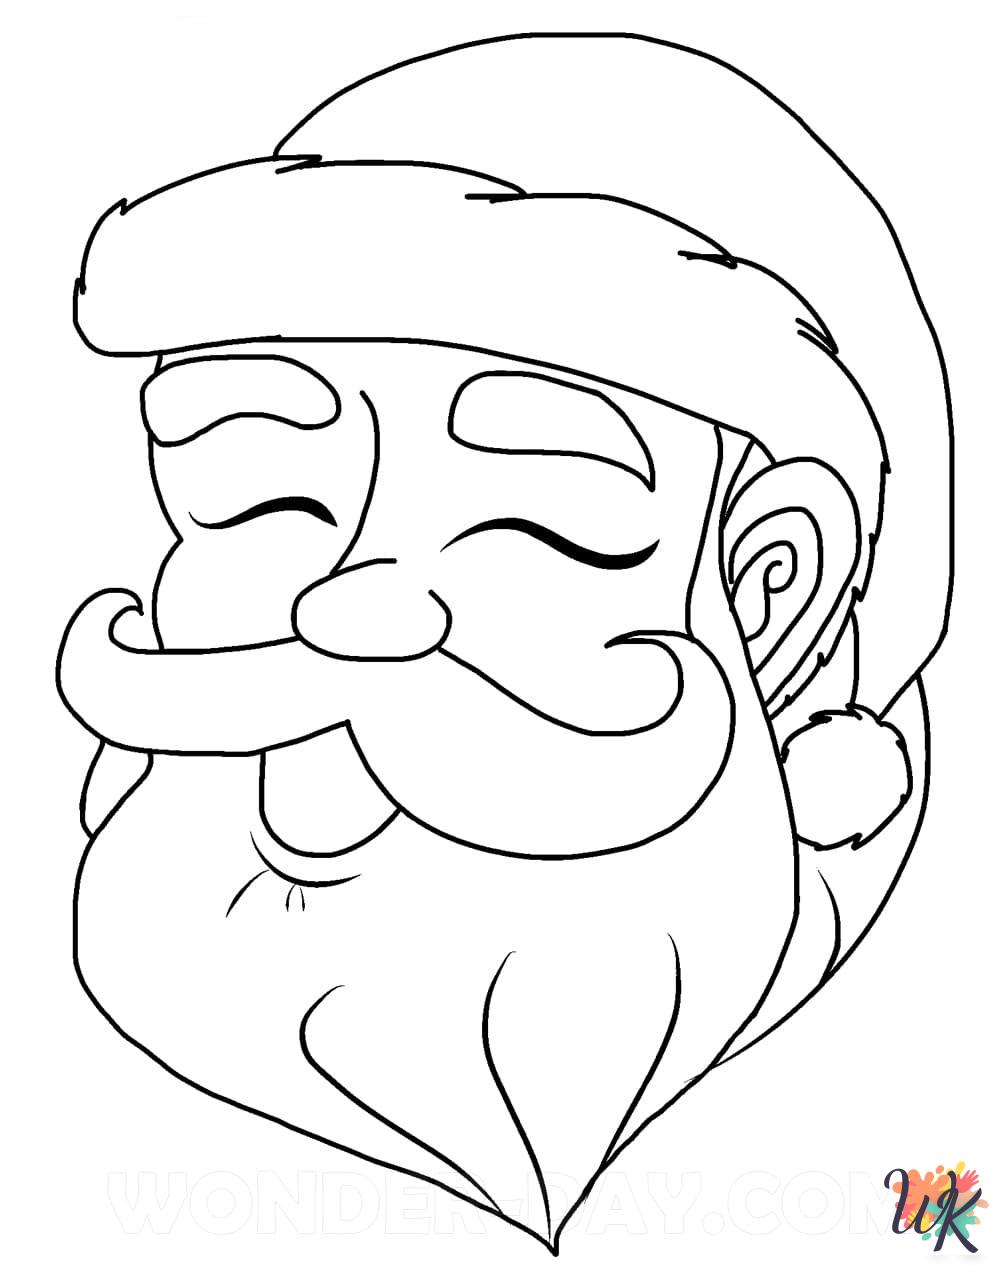 Santa coloring pages for adults easy